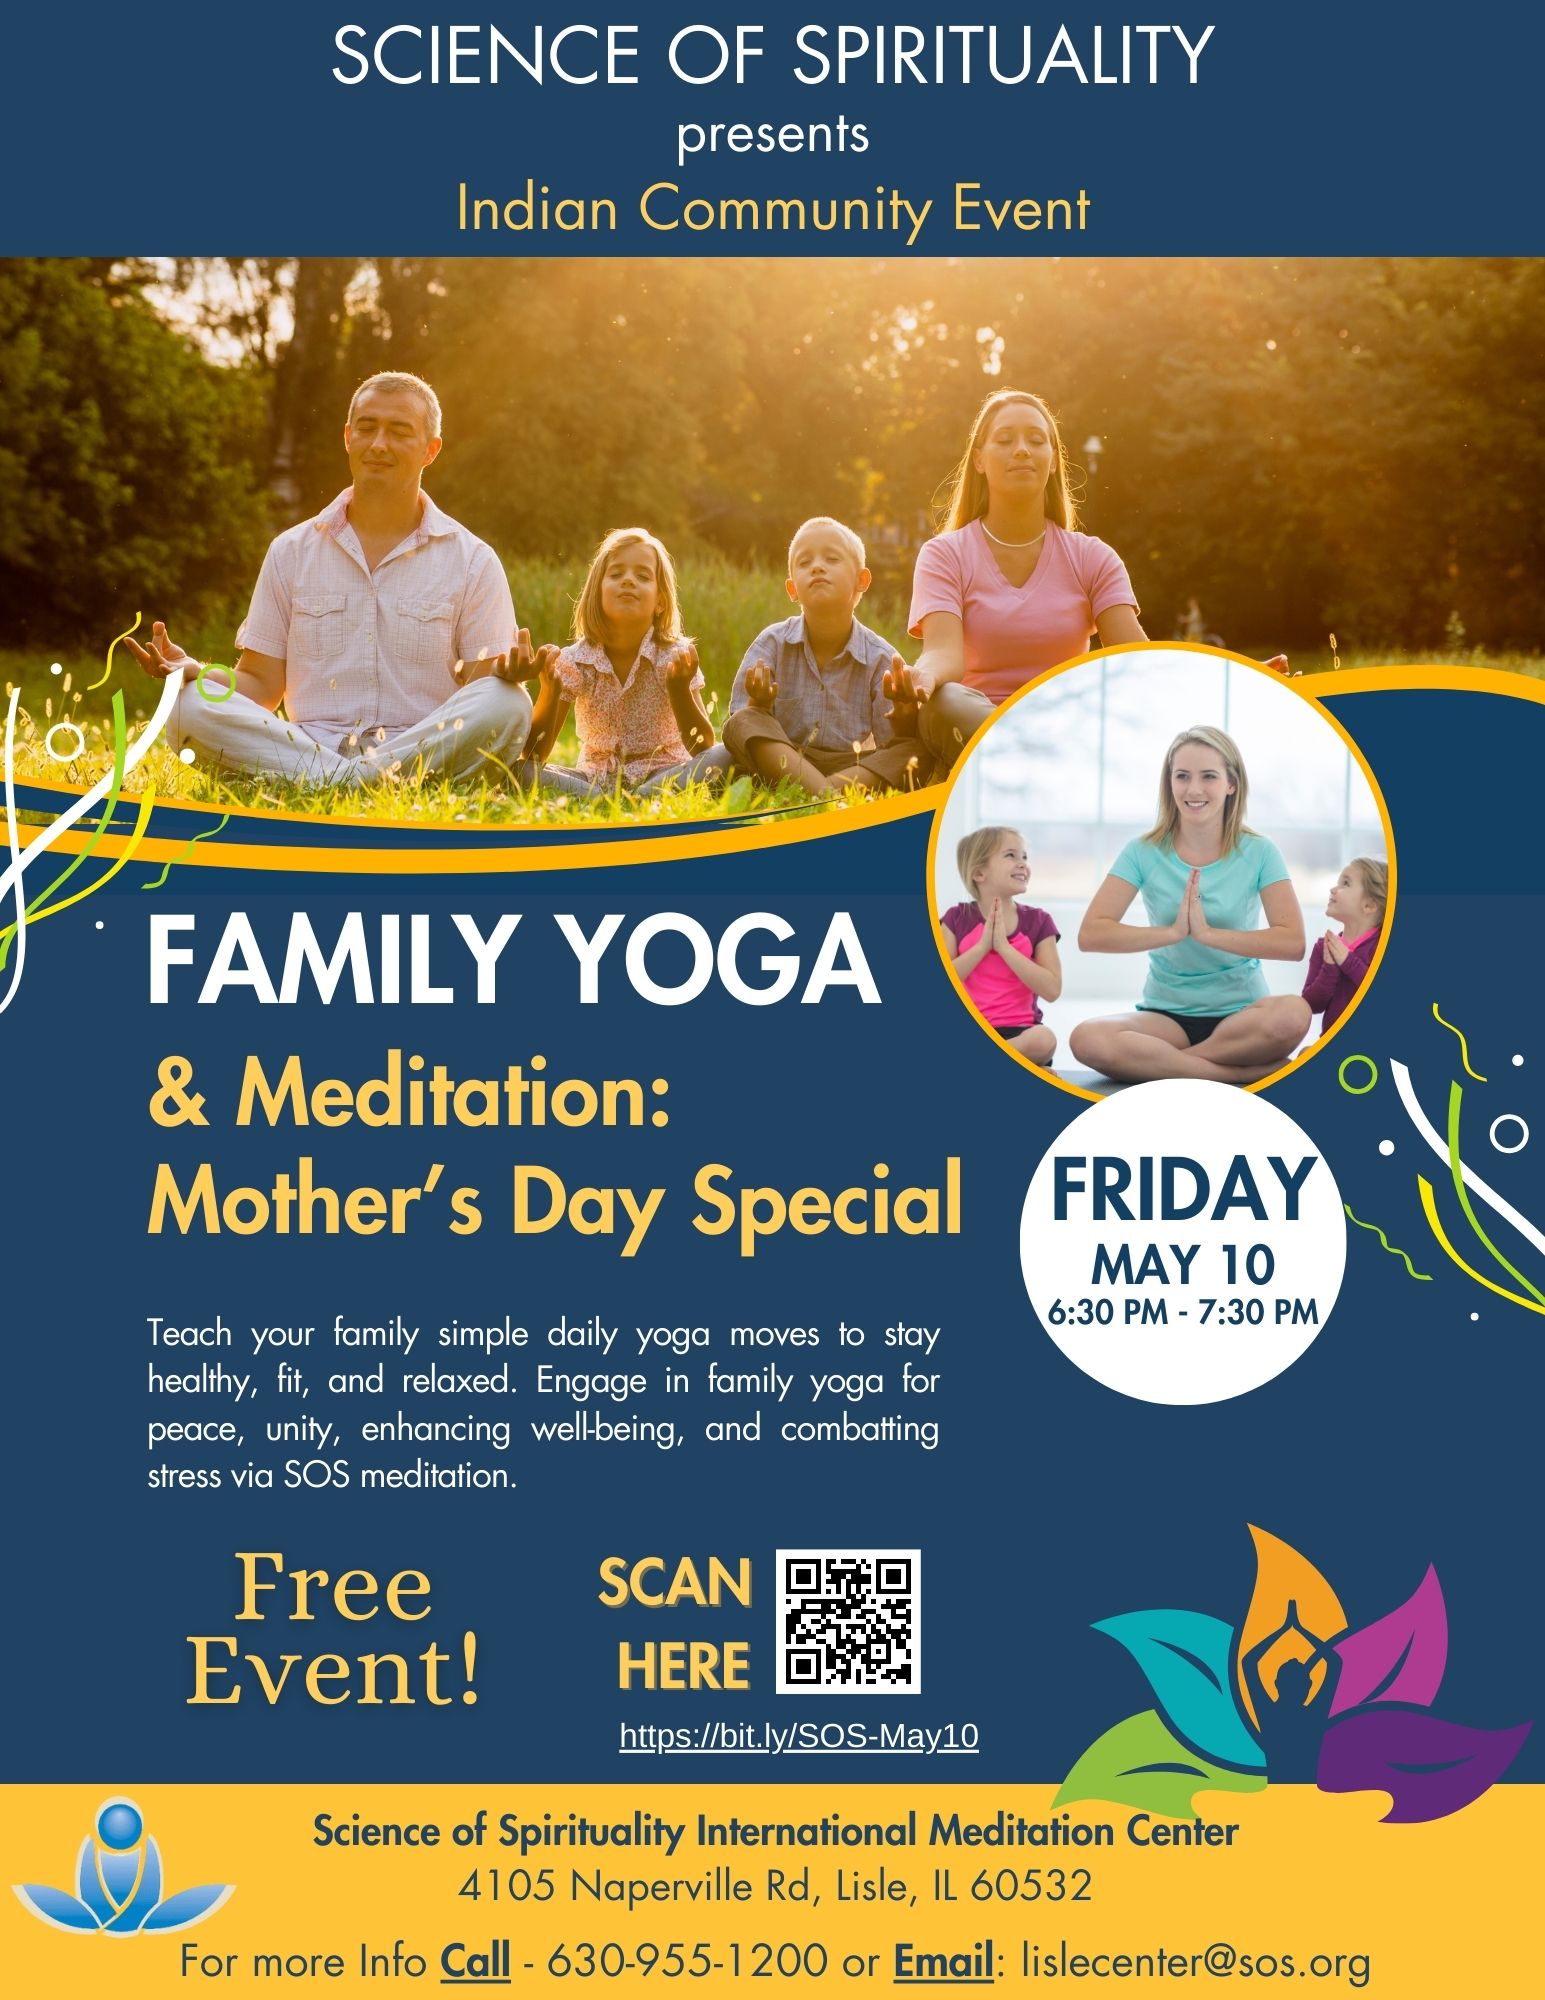 Family Yoga & Meditation: Mother's Day Special